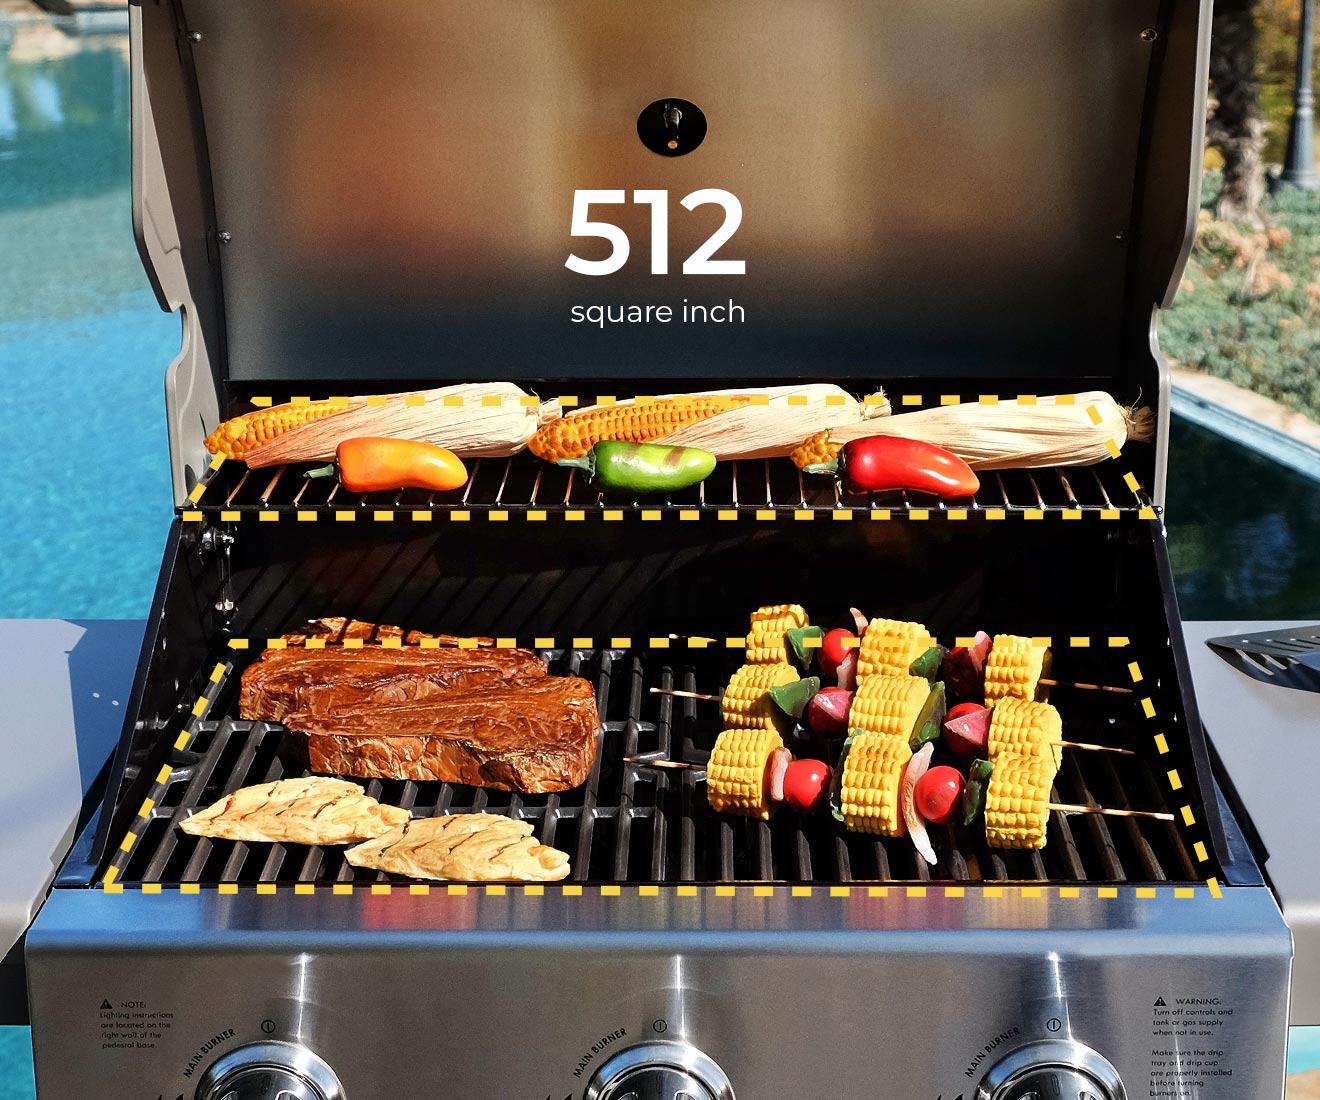 Permasteel 3-Burner Gas Grill PG-40301 in Azure for Outdoor Grilling BBQ Barbecue Barbeque 512 square inches of cooking surface area